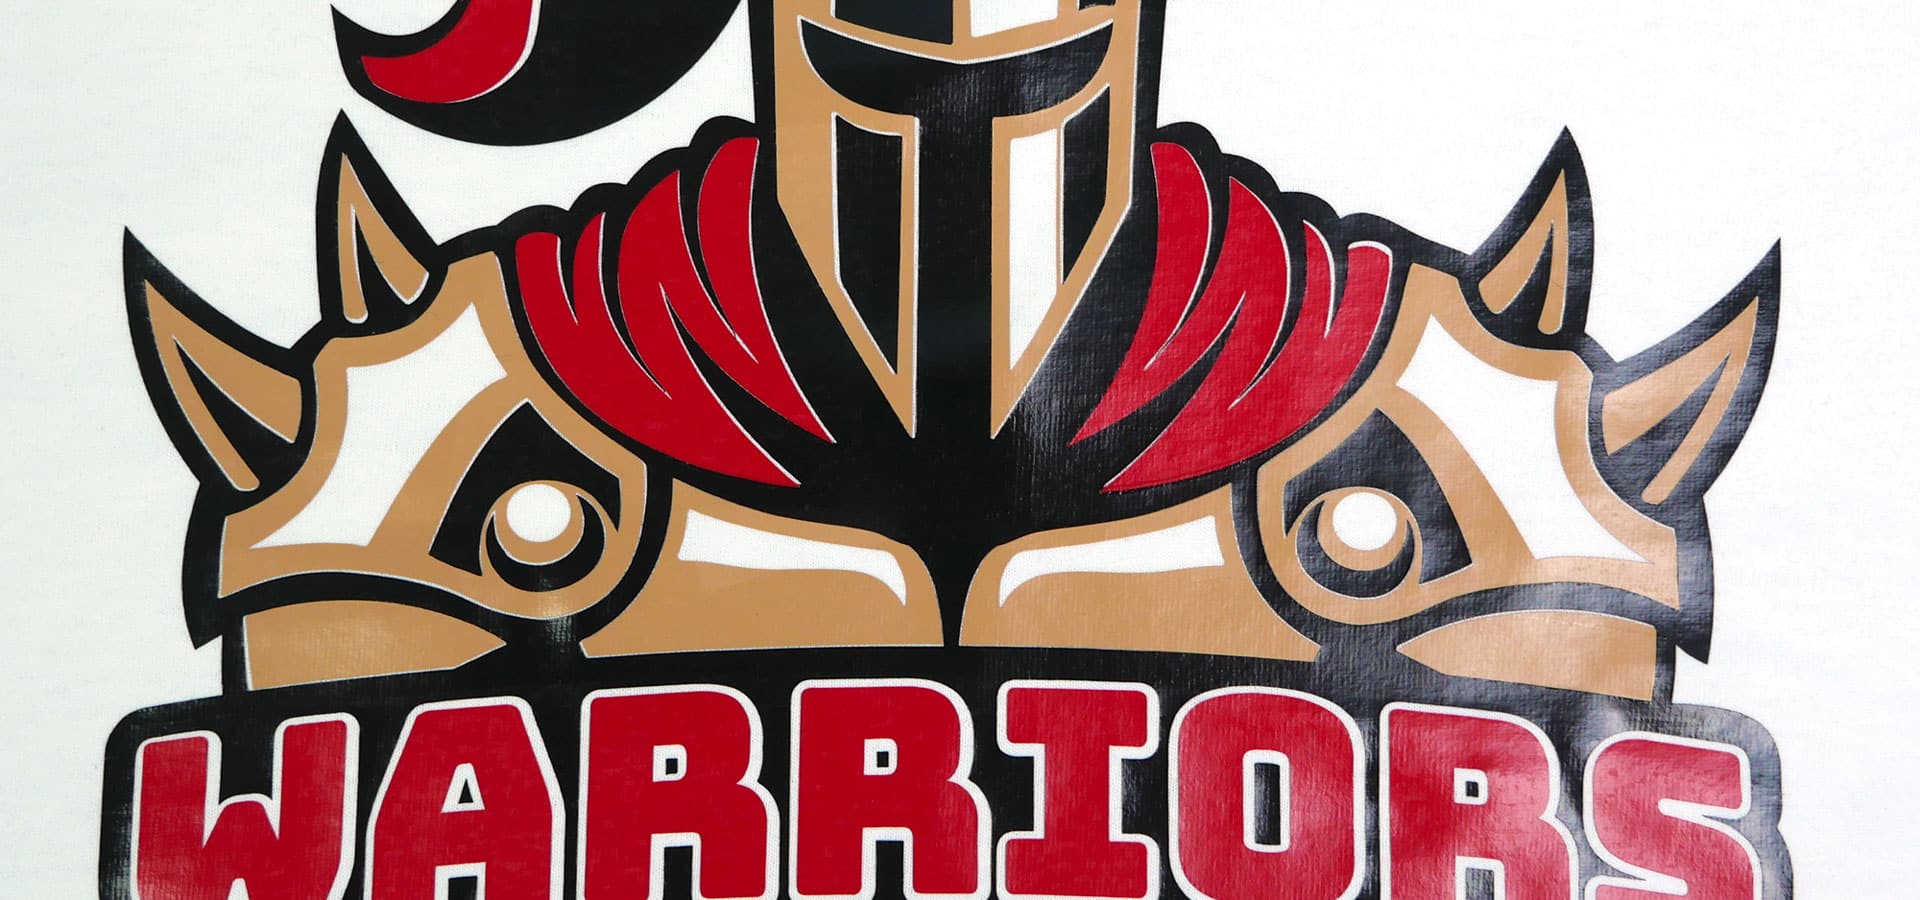 A design of a man in armor with the word "Warriors" underneath it made with Red, Camel, and Black EconomyFlex™